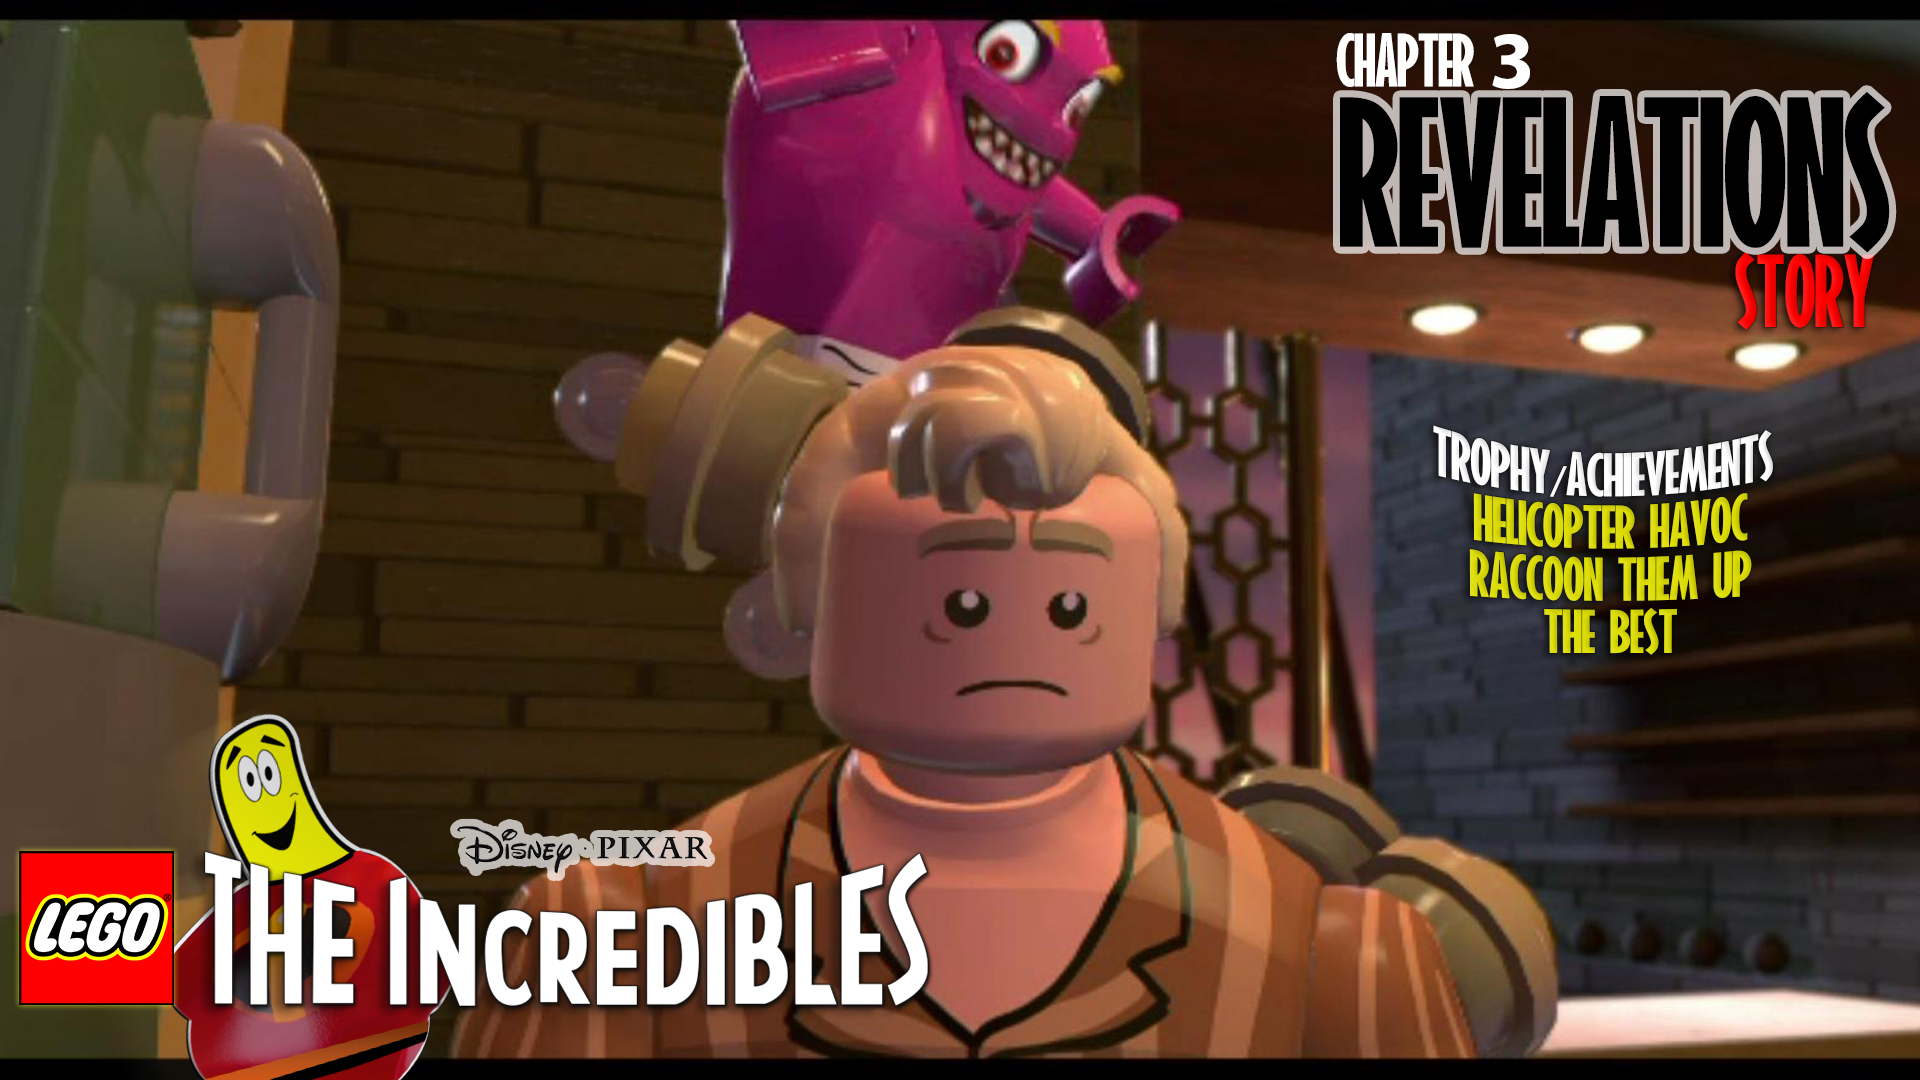 Lego The Incredibles: Chapter 3 / Revelation STORY – HTG